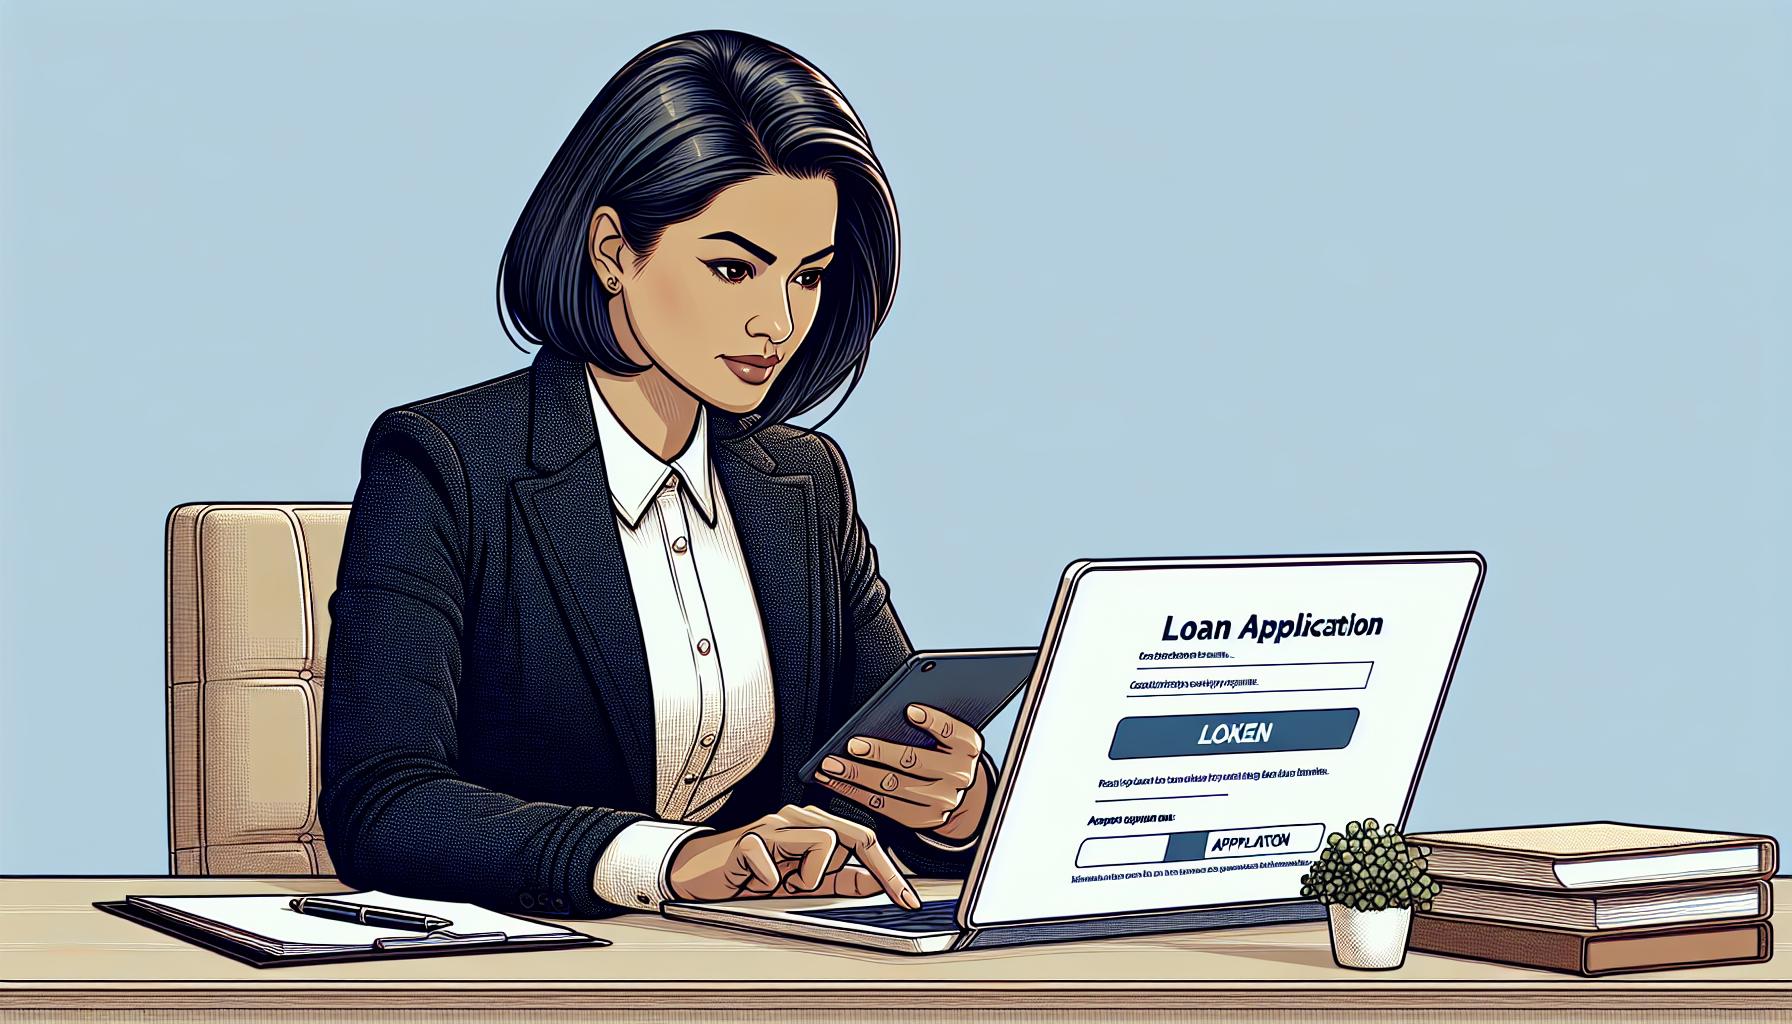 Applying for a $300 Loan with LendUp